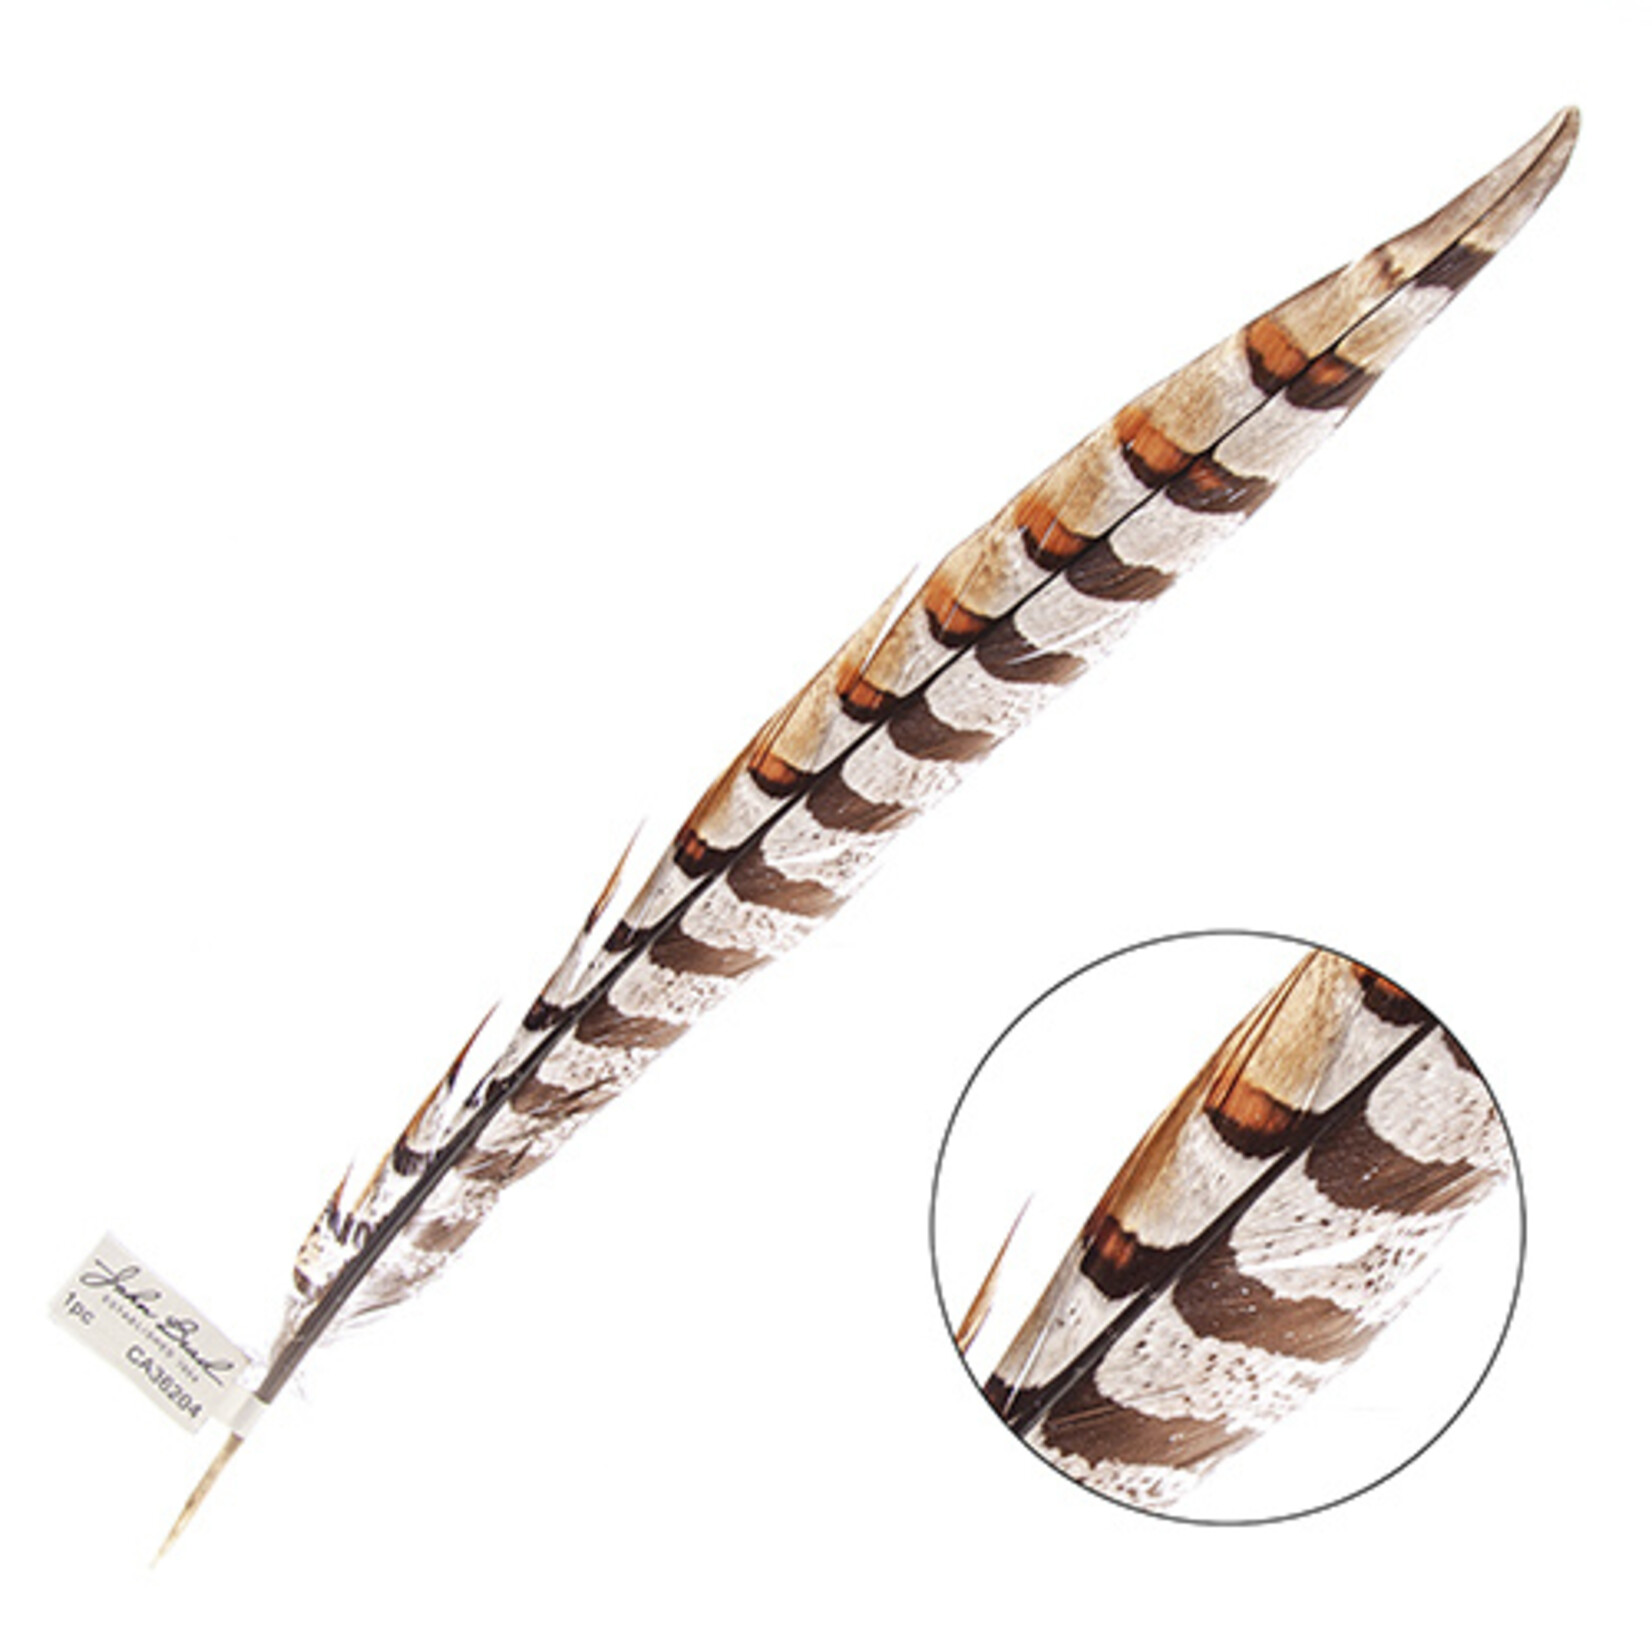 Reeves Pheasant Tail Natural 16 - 18 Inch